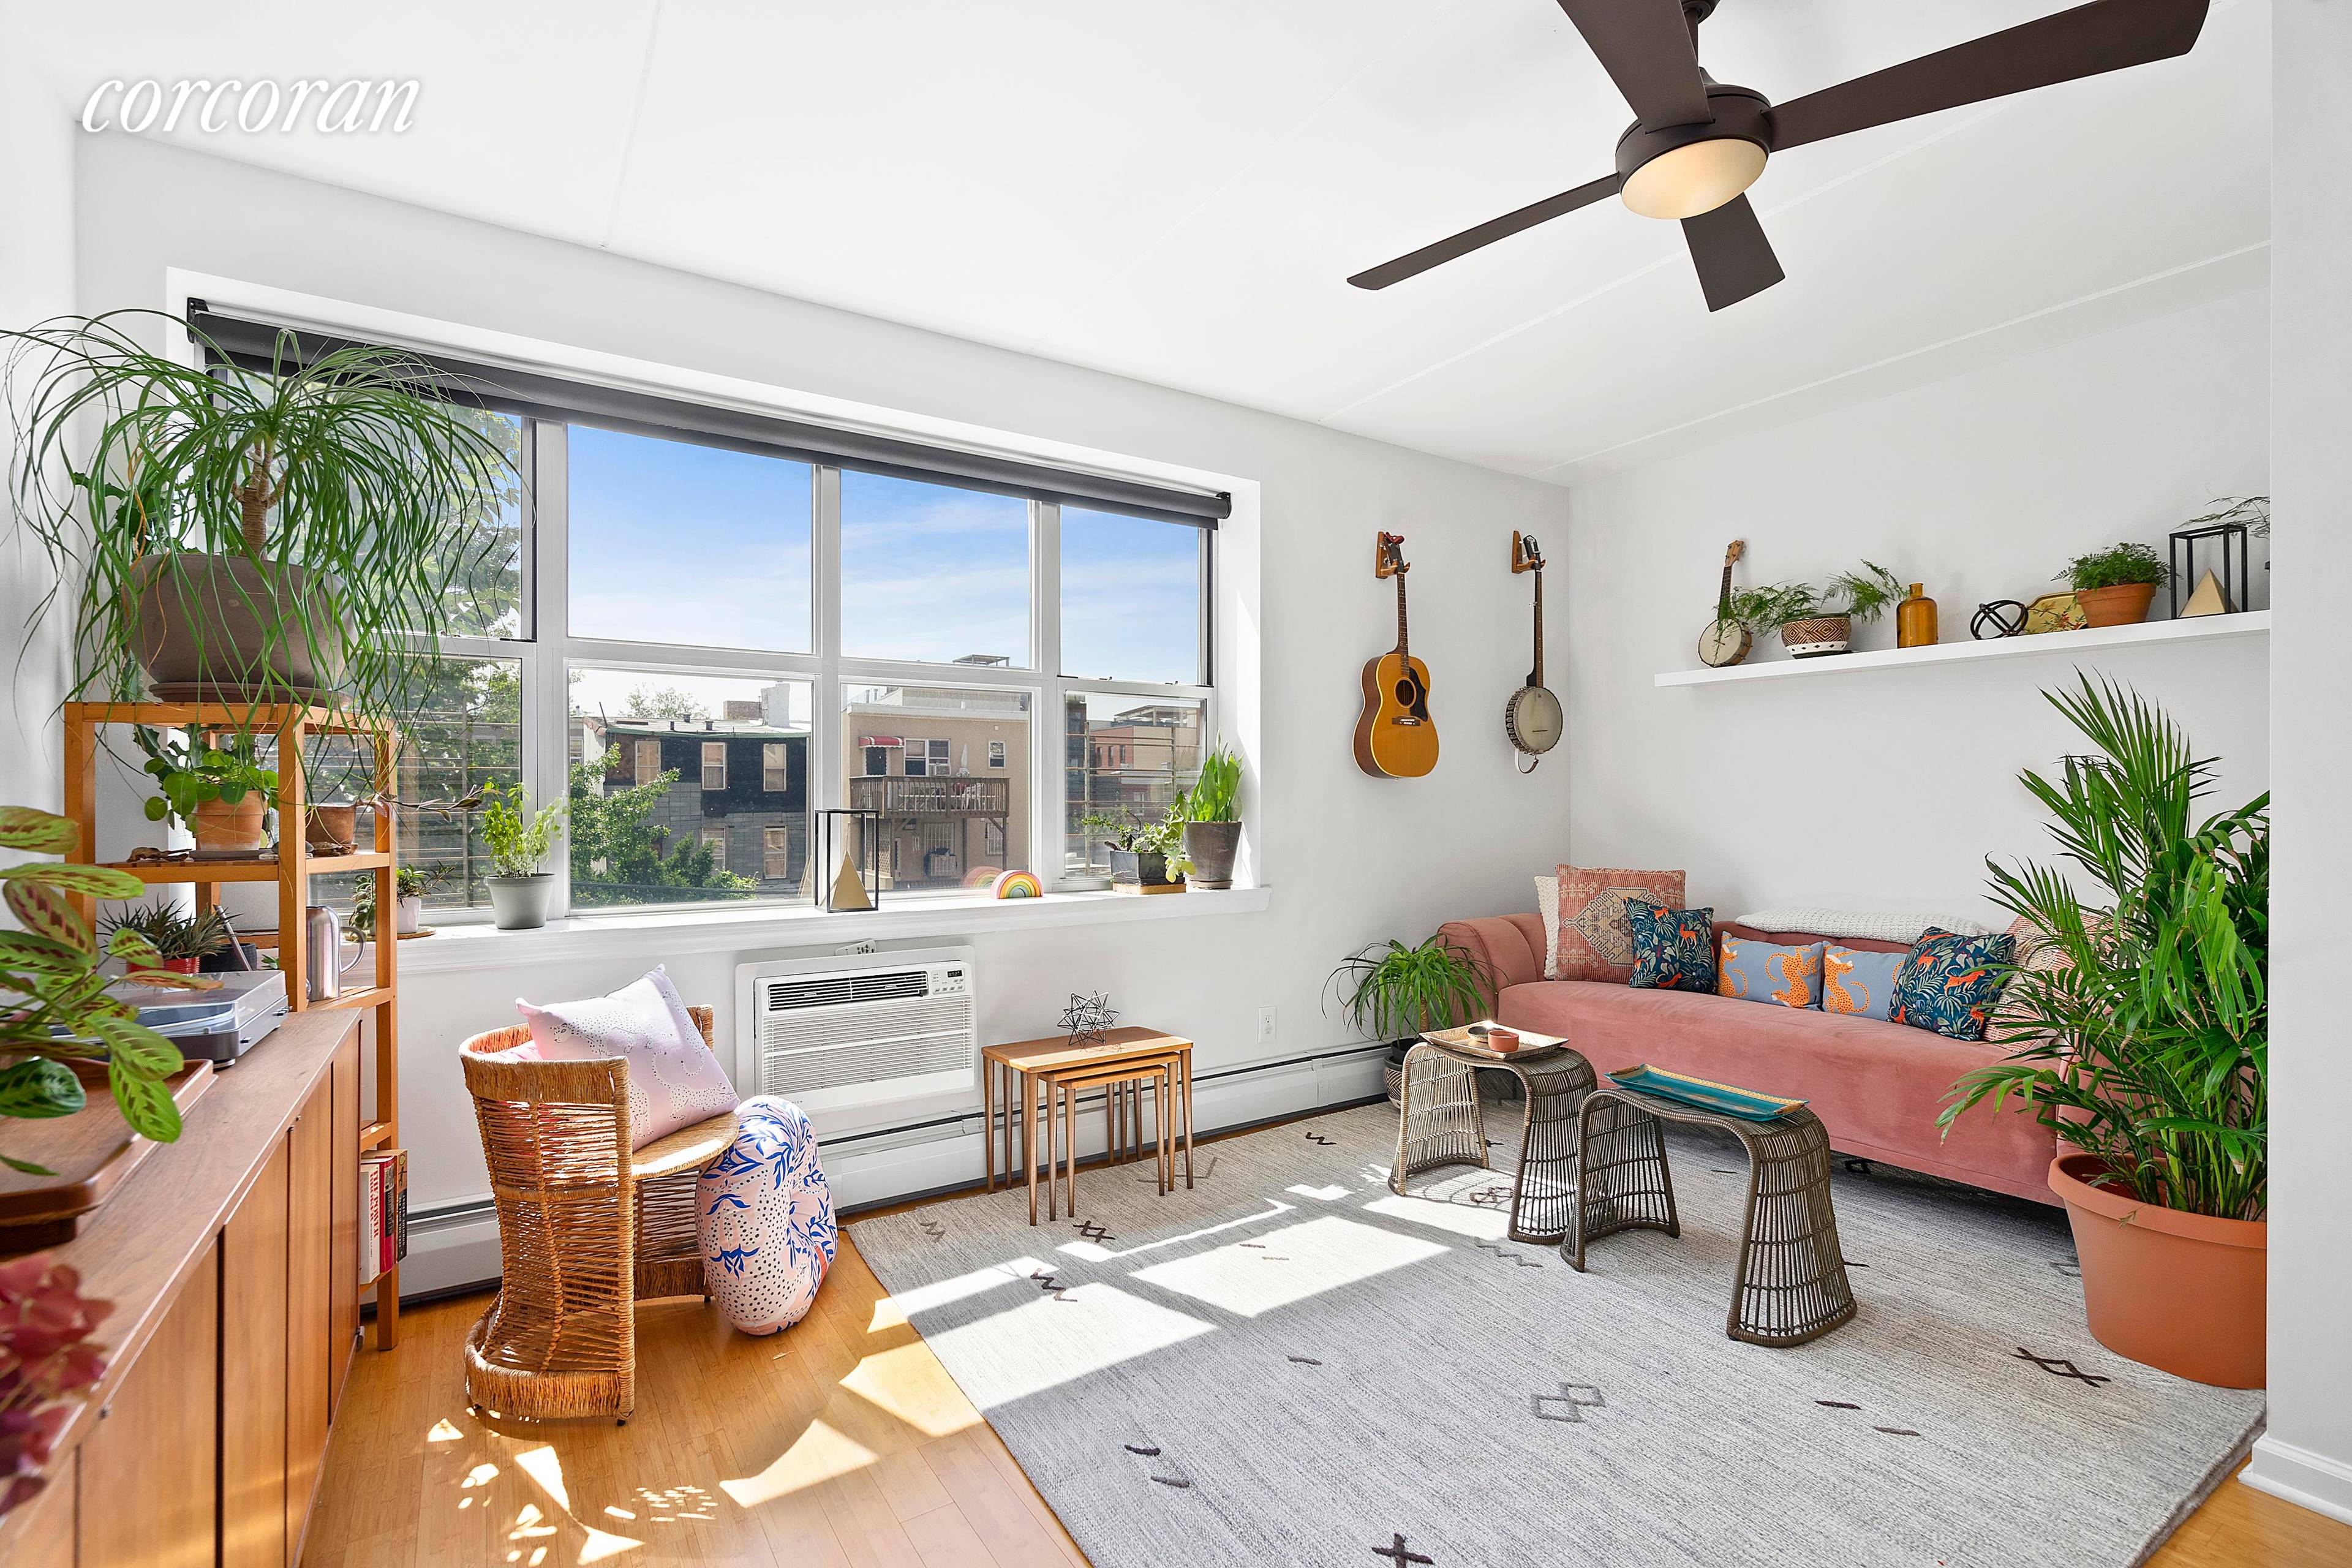 BEST DEAL IN RED HOOK ! Sunny 2 bedroom 1 bath coop with gorgeous south facing light in the heart of charming Red Hook.